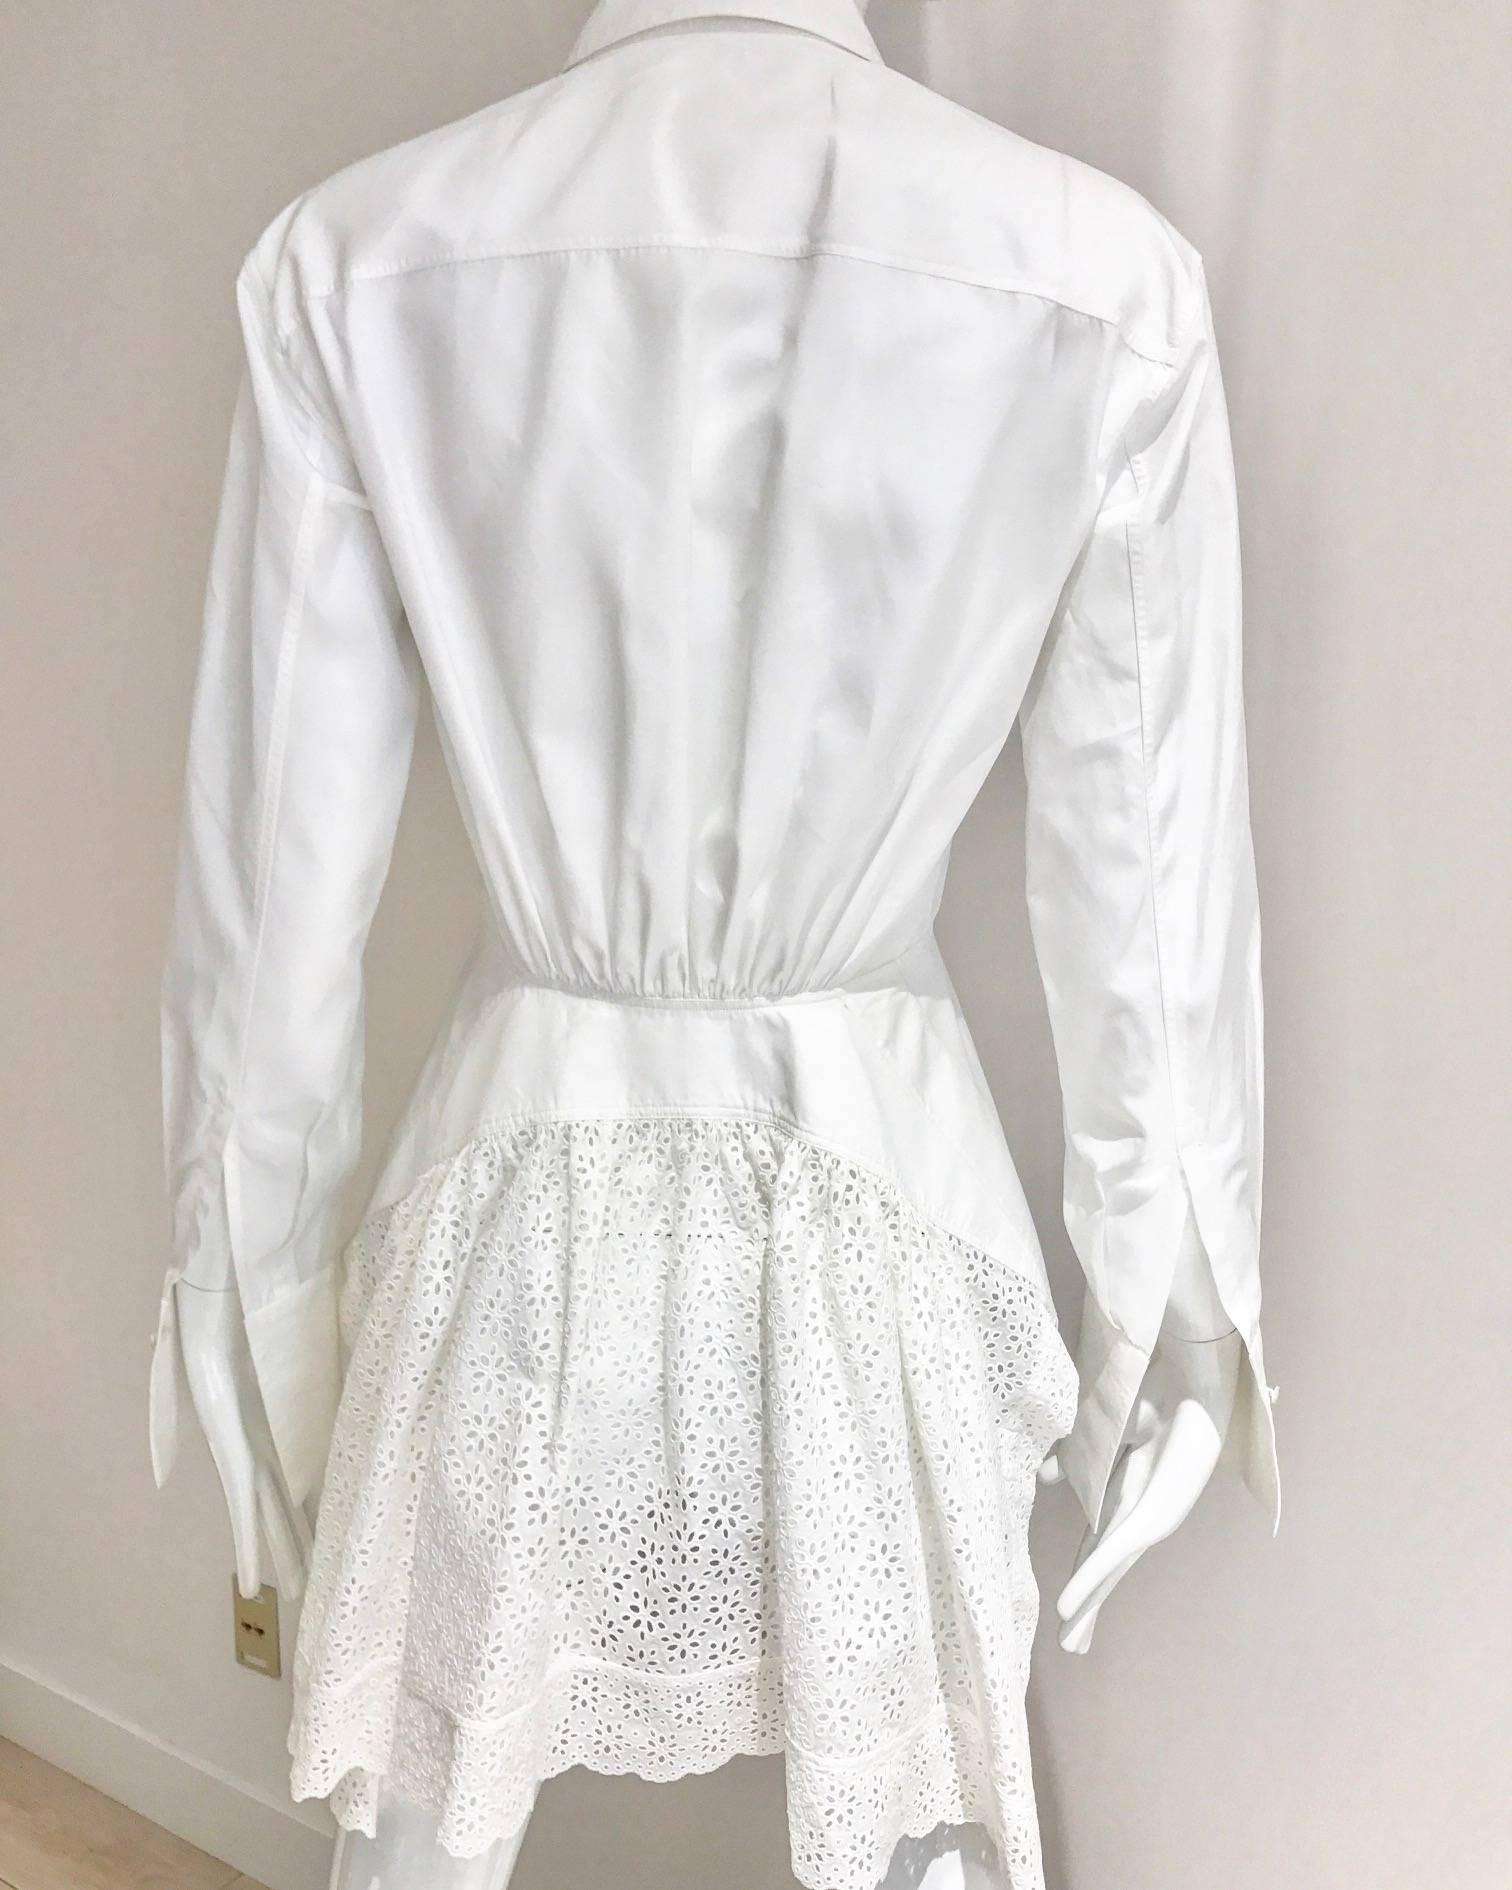 ALAIA white cotton shirt with eyelet tail.  Marked size 38
Fit US 4. Shirt in excellent condition.